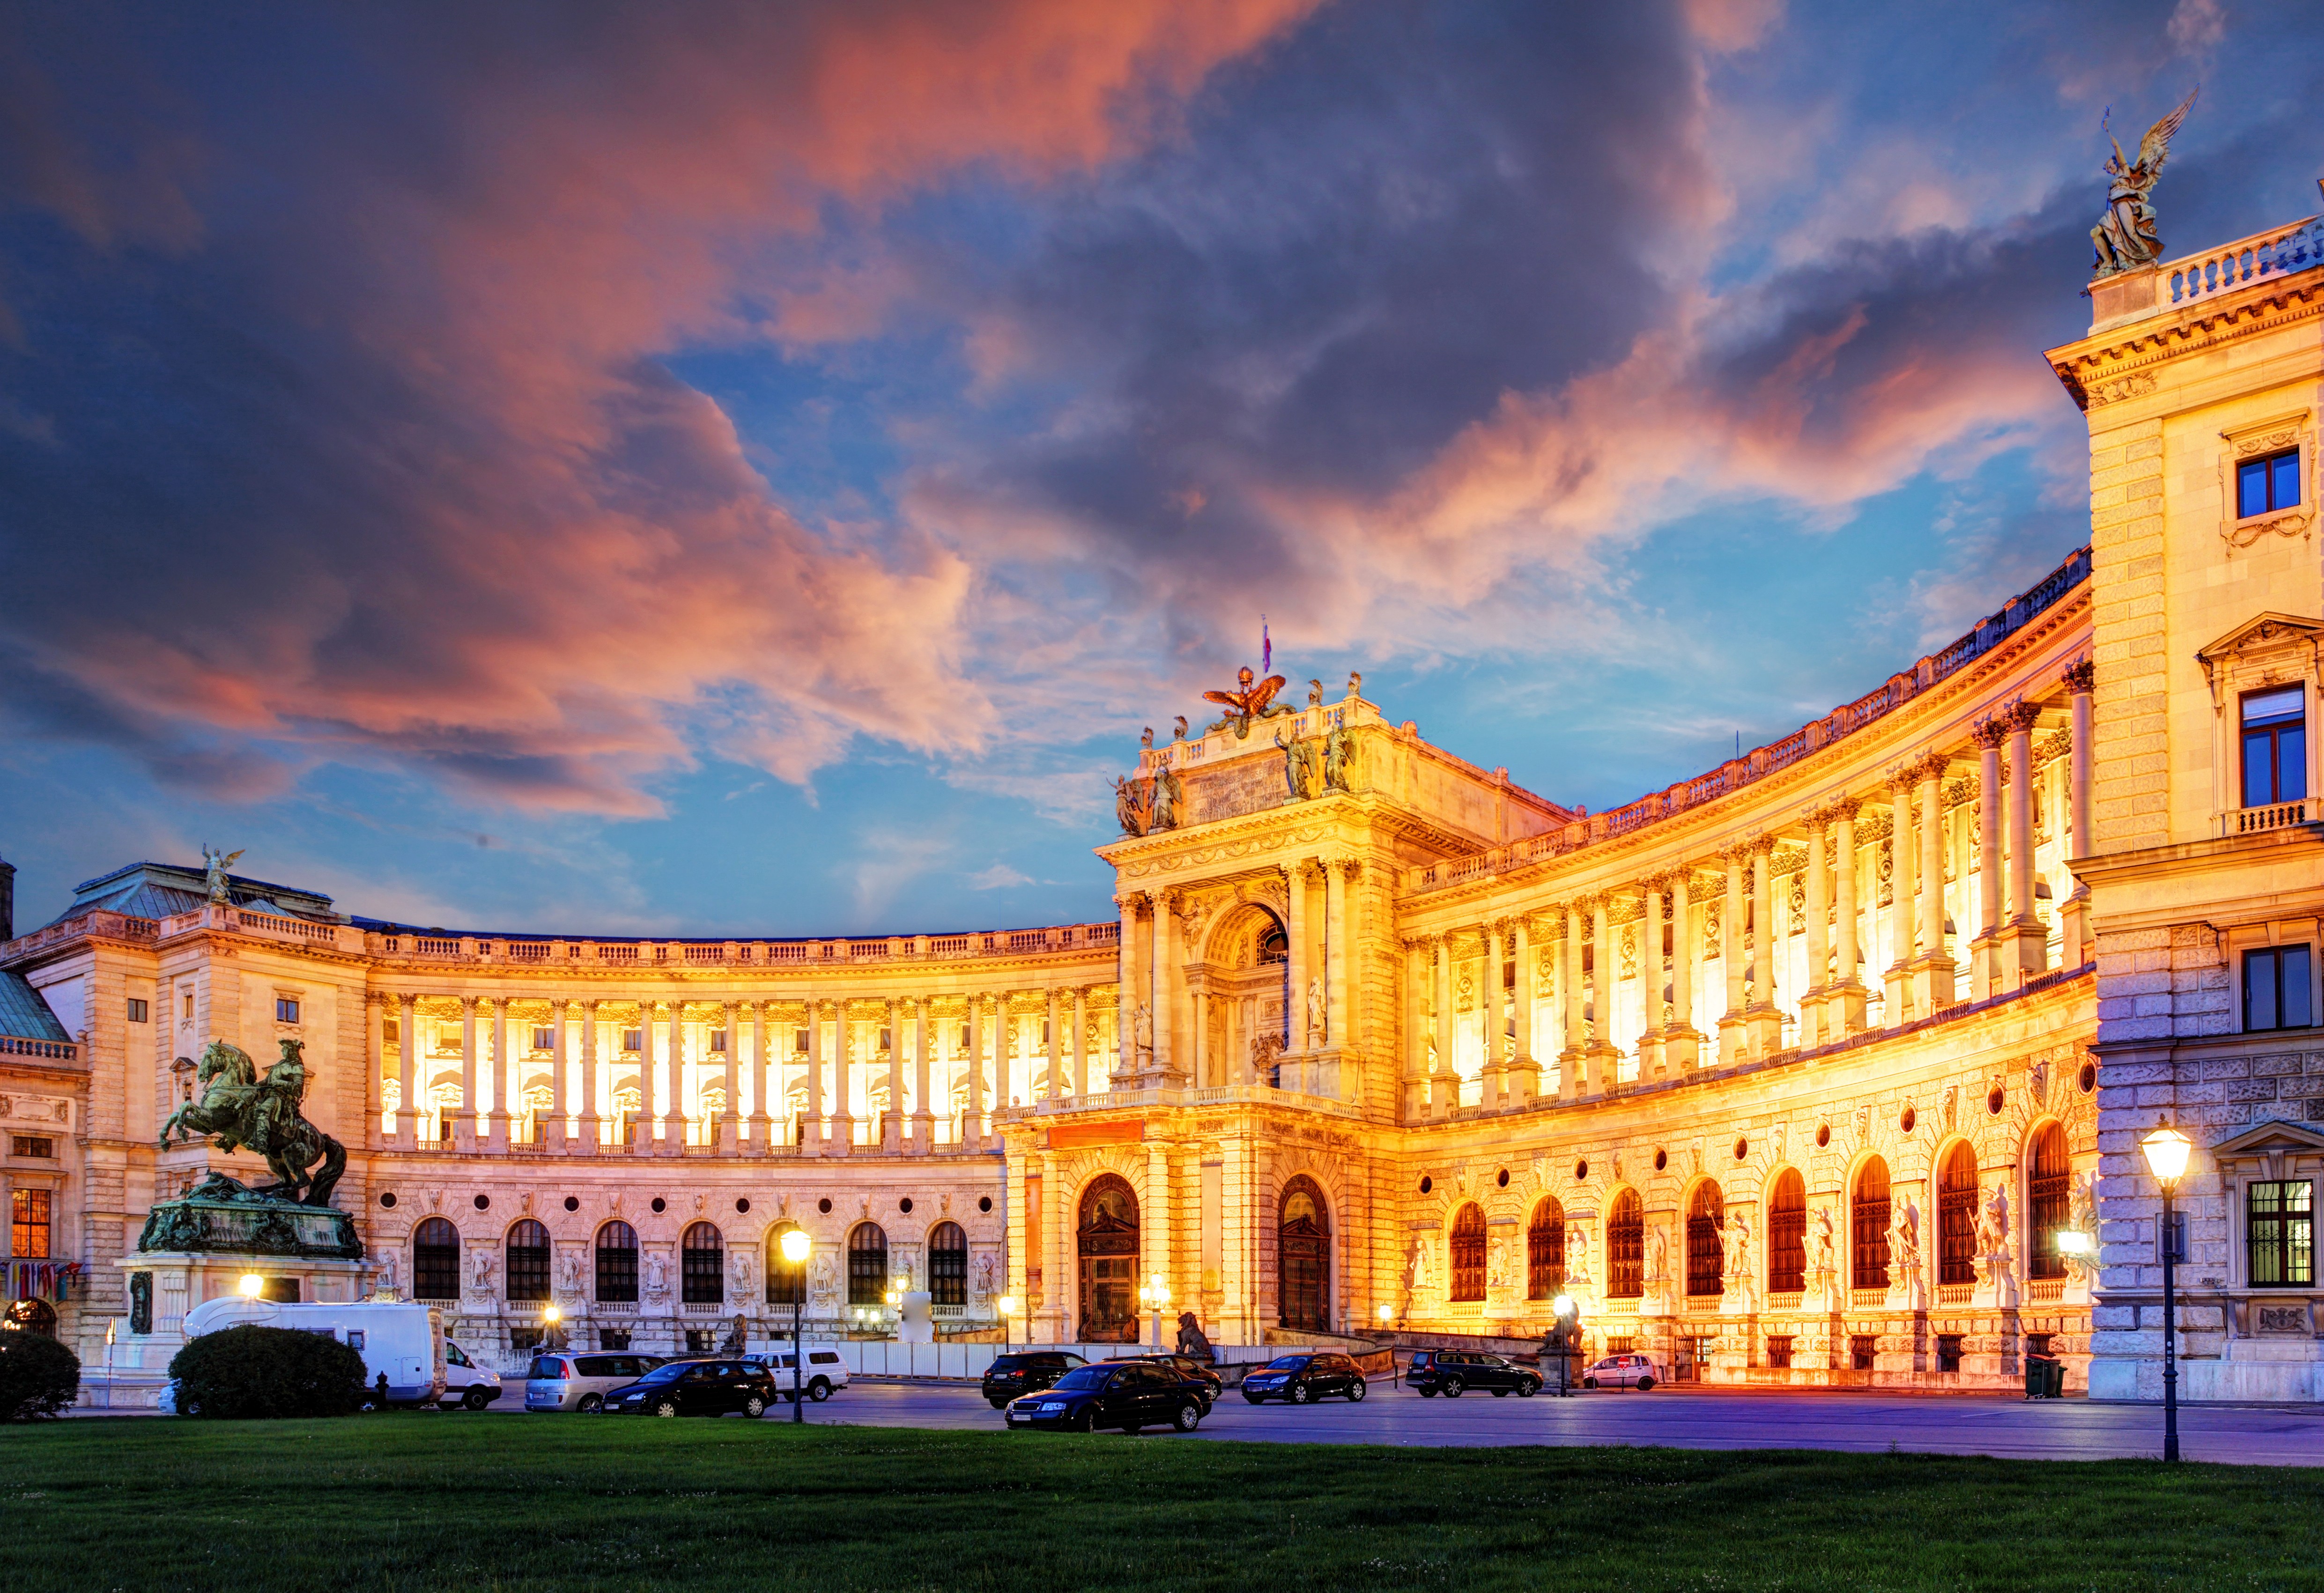 From its historic coffeehouses to classical music nights to grand, glitzy ballrooms, the Austrian capital has a wealth of cultural joys for the visitor to experience. Here are the highlights